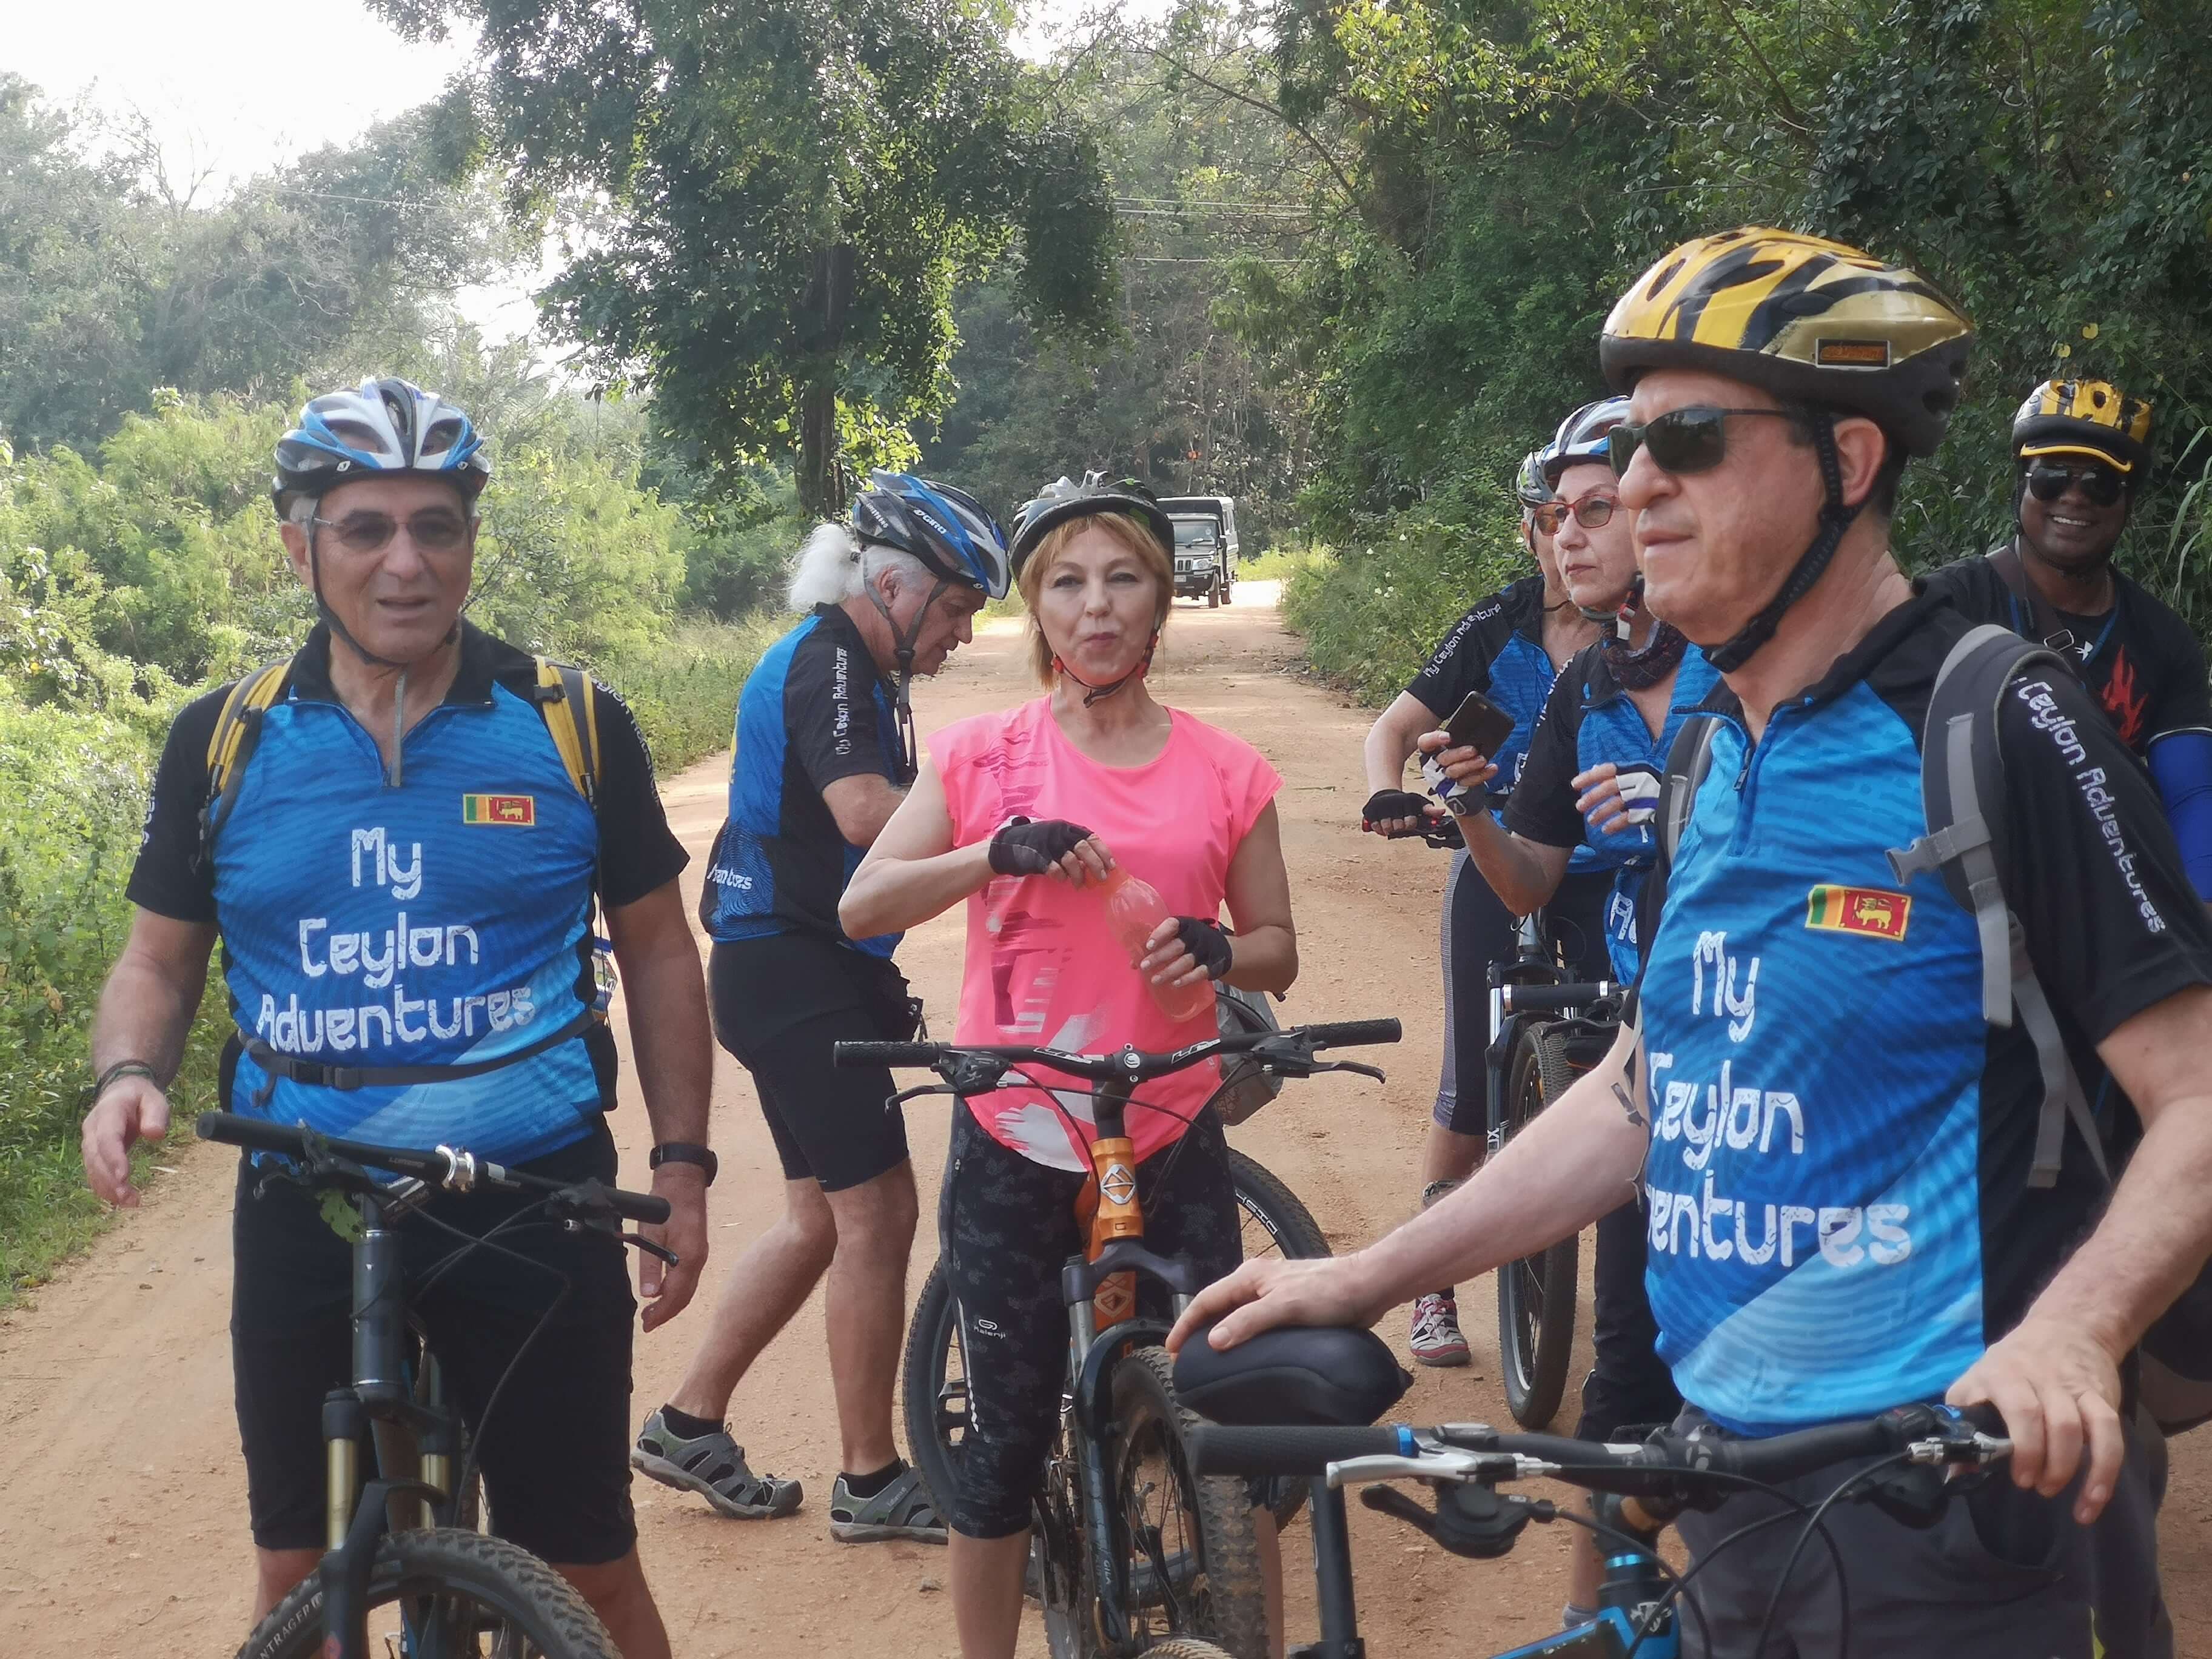 A picture of cyclists taking a short break while the cycle tour on the dirt roads